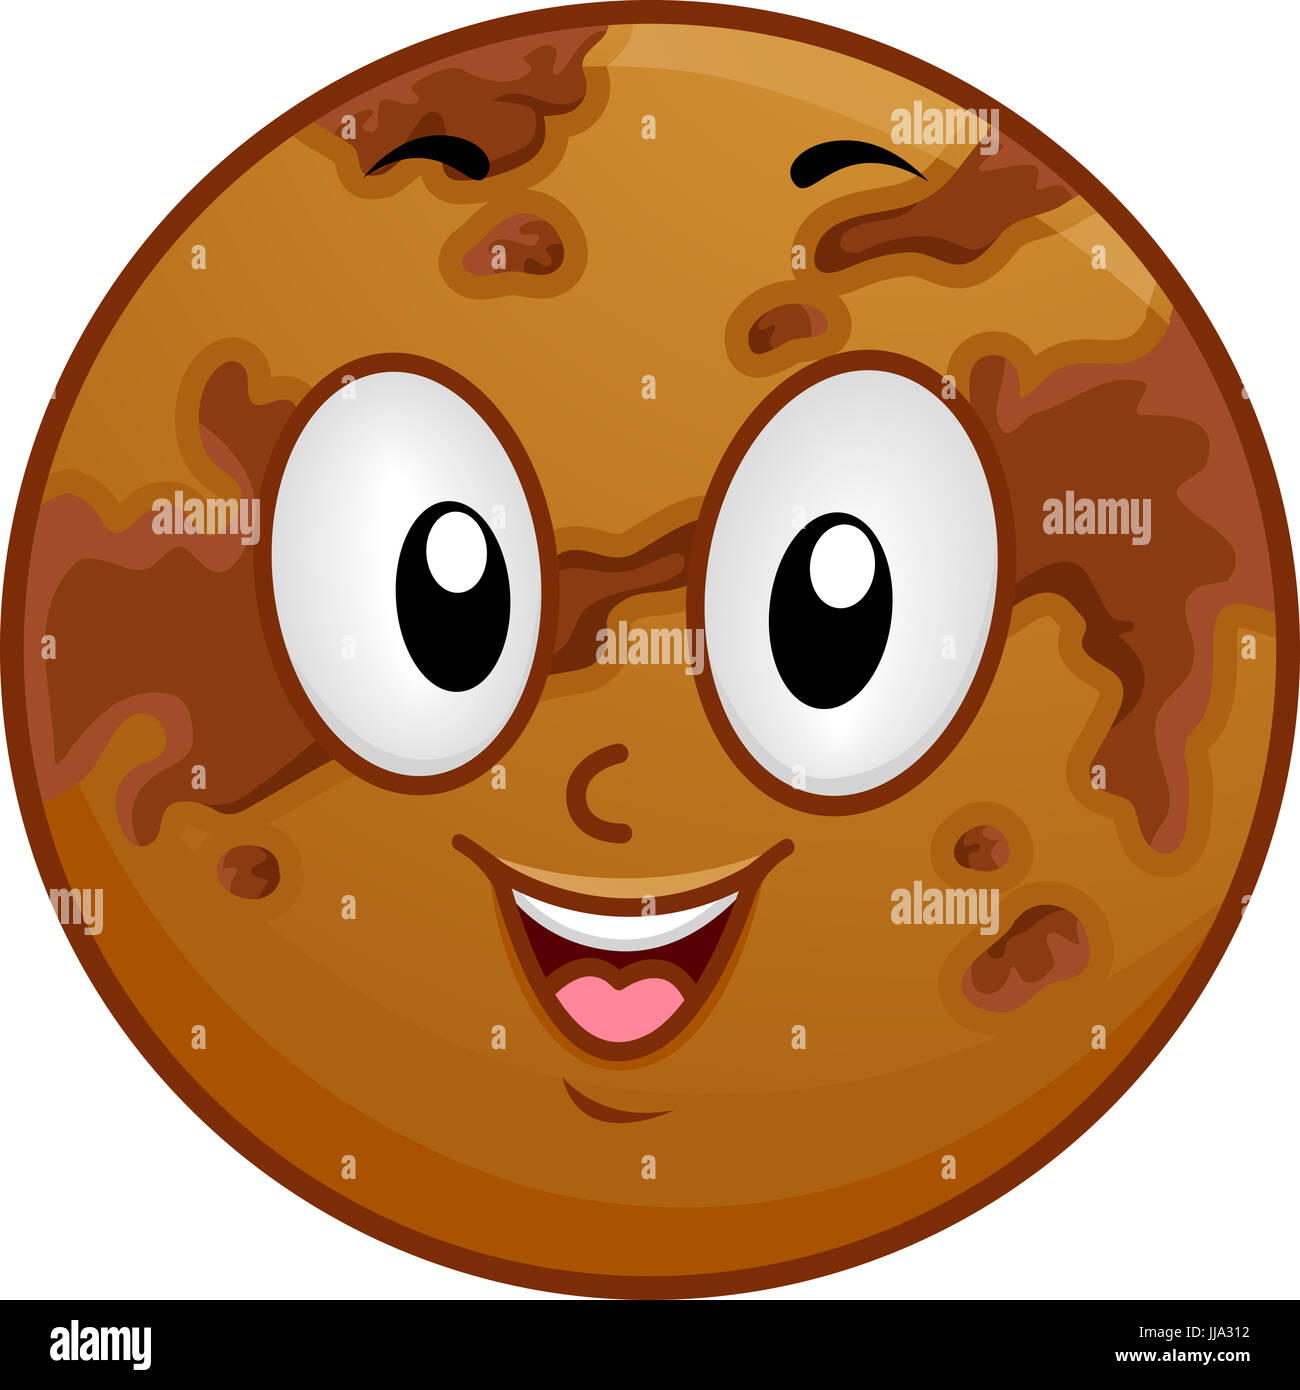 Illustration of a Venus Mascot Featuring a Smiling Brown Planet Covered with Dark Spots Stock Photo